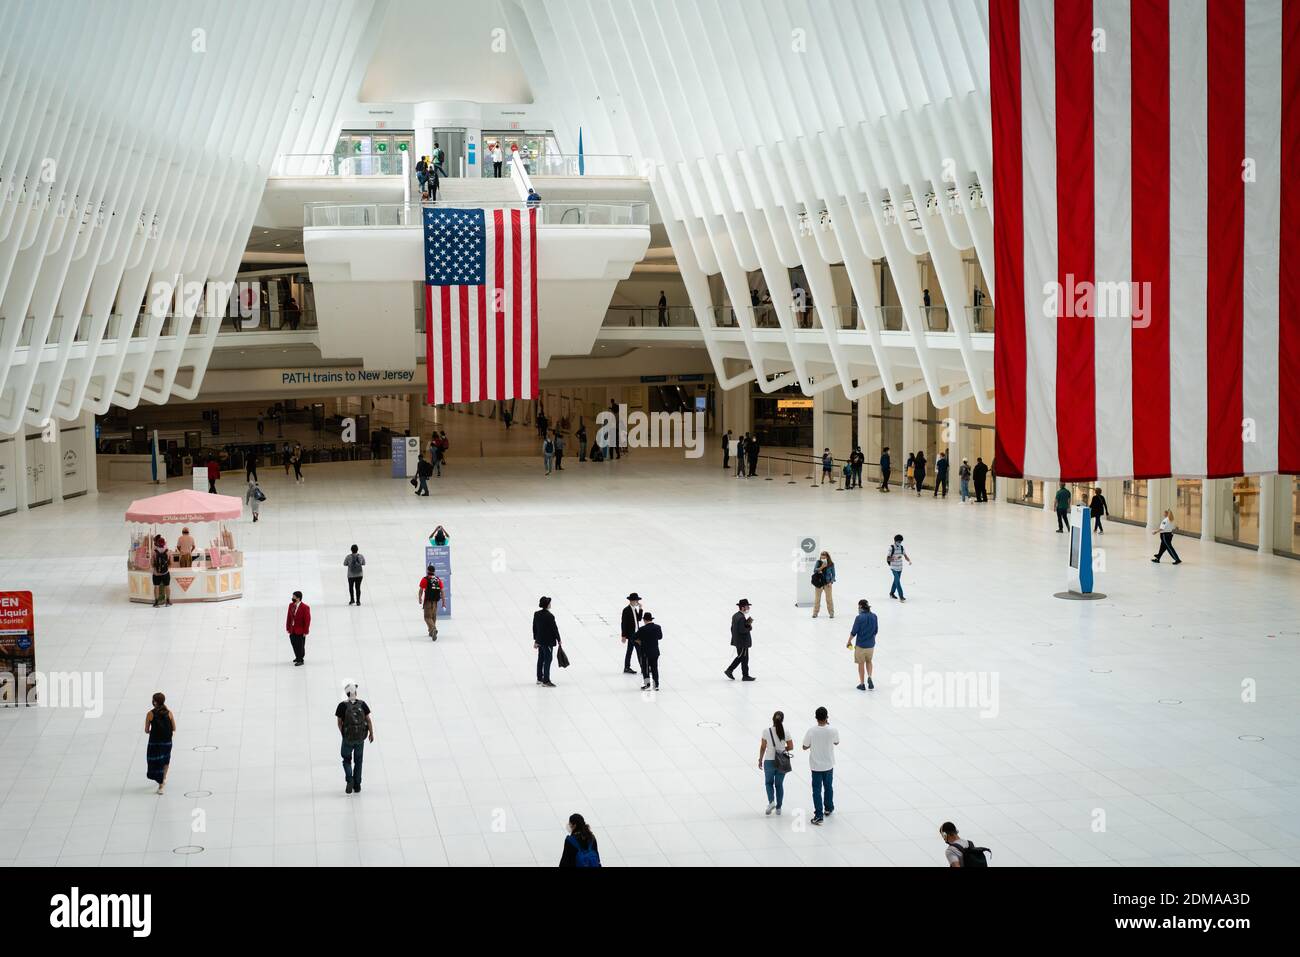 NEW YORK, UNITED STATES - Sep 12, 2020: The Westfield World Trade Center shopping plaza in lower Manhattan on the anniversary of the 9/11 attacks. Stock Photo